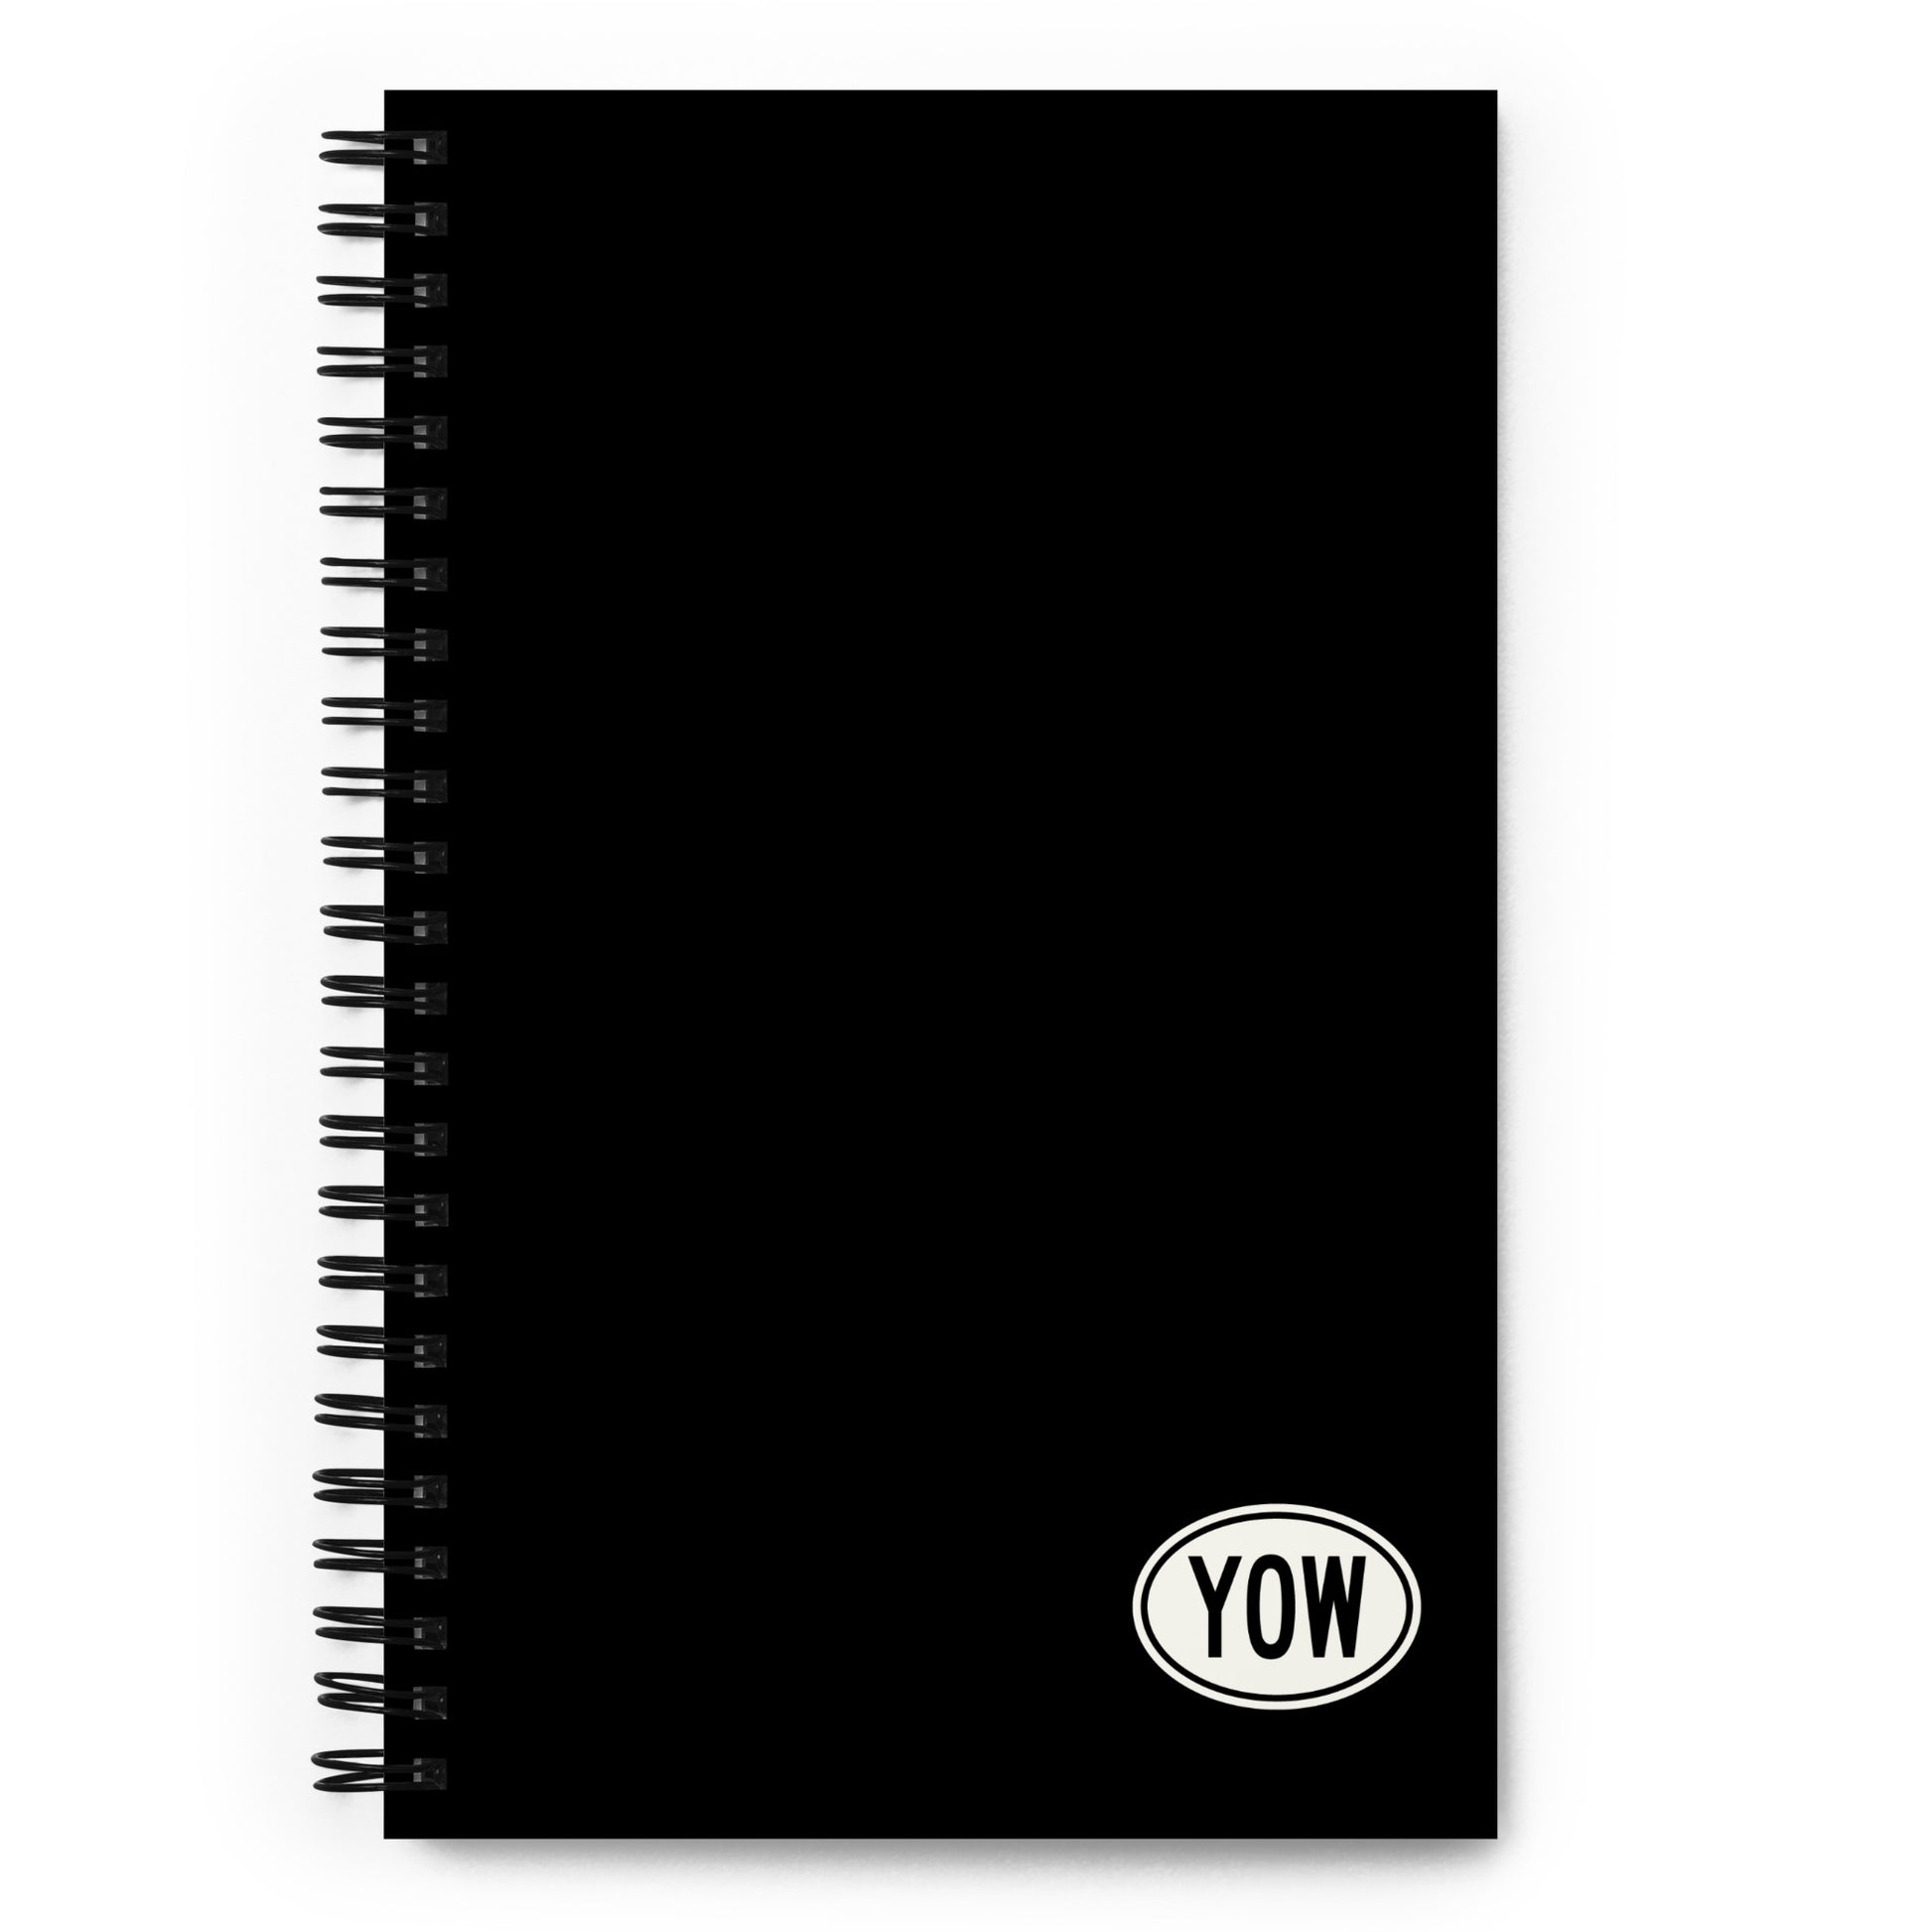 Unique Travel Gift Spiral Notebook - White Oval • YOW Ottawa • YHM Designs - Image 01